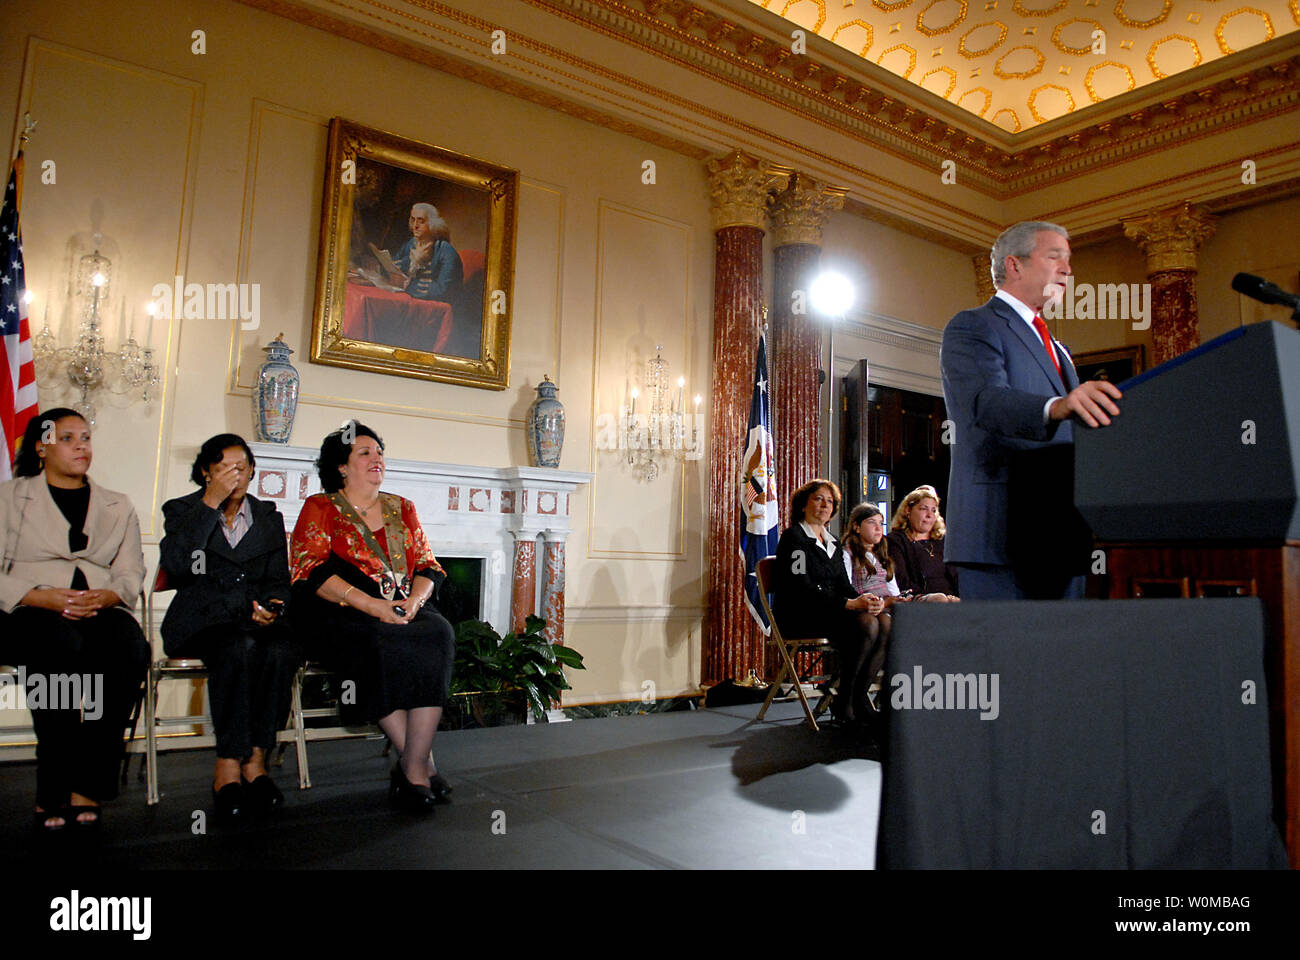 United States President George W. Bush makes remarks on Cuba Policy at the  United States Department of State in Washington, D.C. on October 24, 2007.  From left to right behind the President: